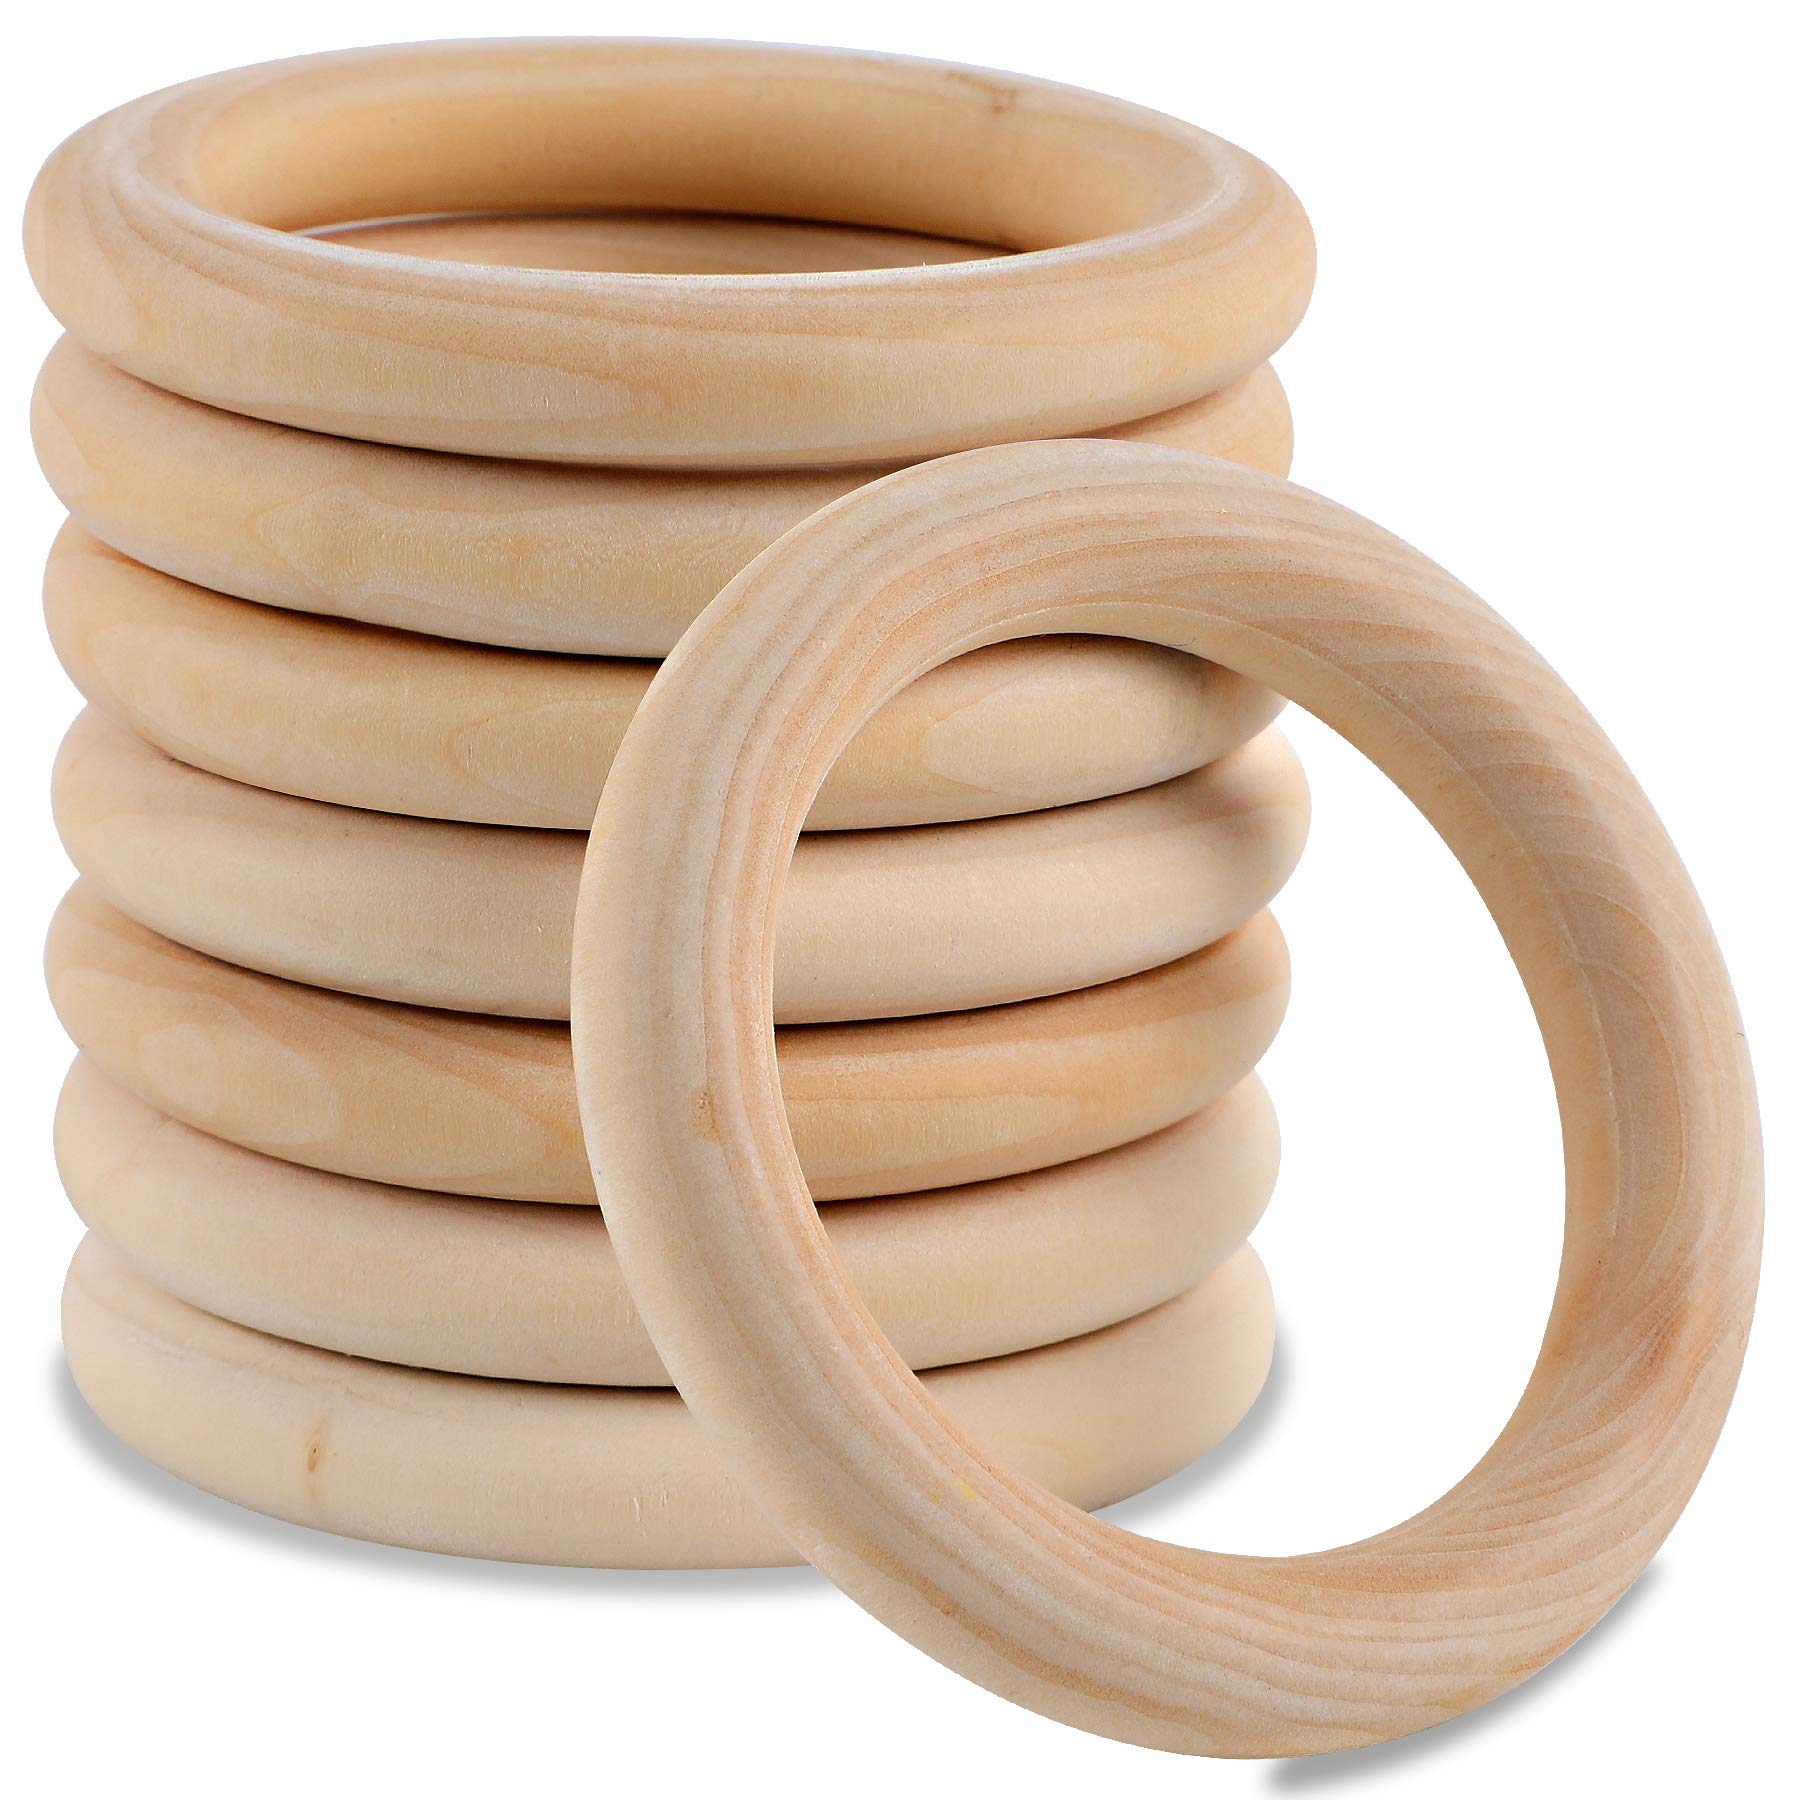 Augsun 10 Pcs Macrame Wooden Rings, 60mm/2.4inch Natural Unfinished Solid  Wood Hoops for DIY Craft Pendant Connectors Jewelry Making